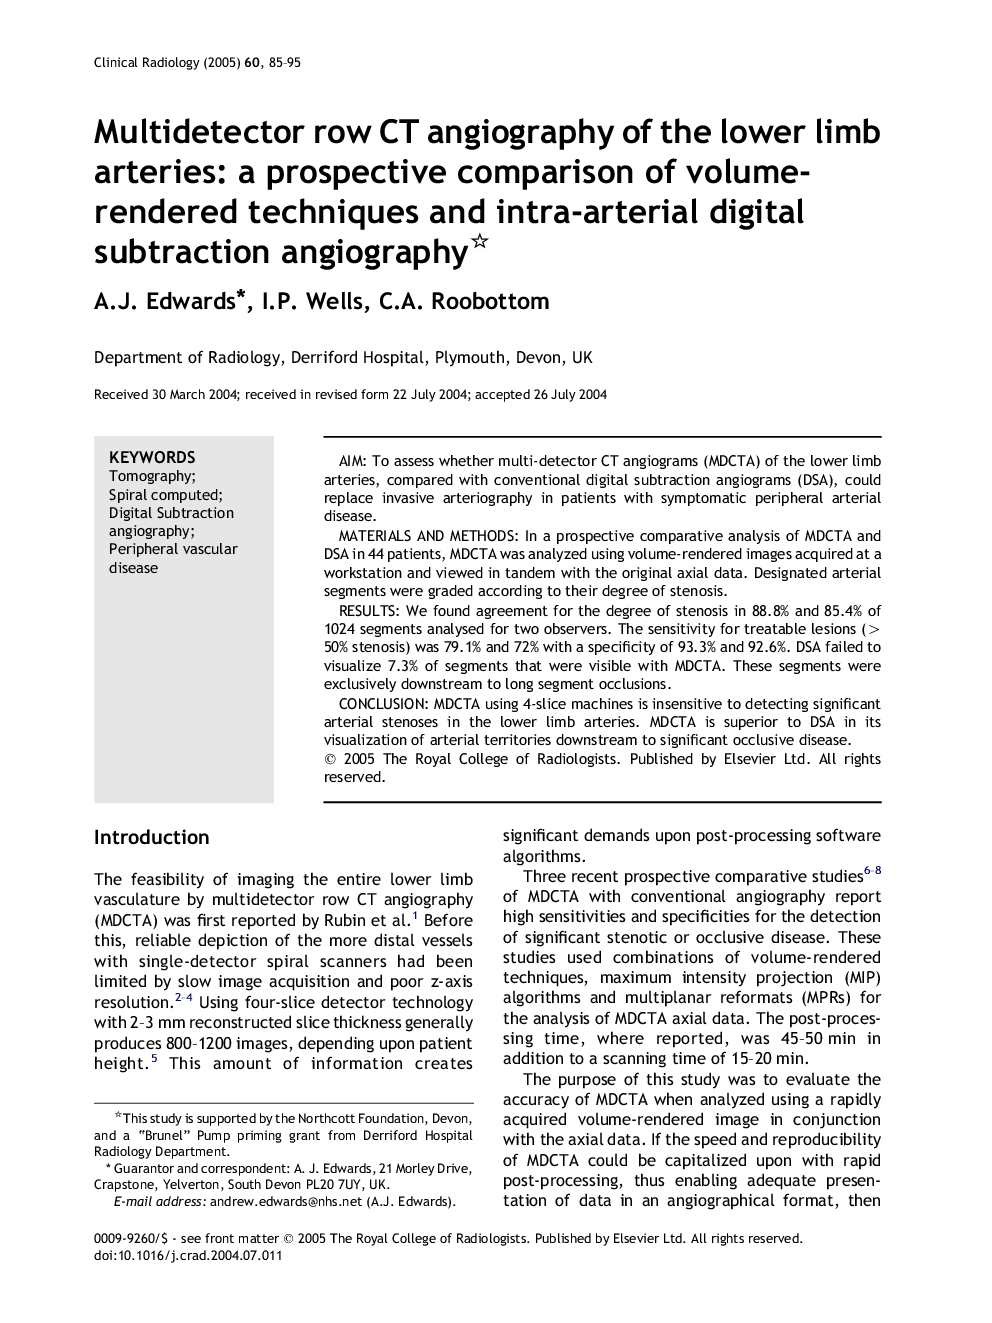 Multidetector row CT angiography of the lower limb arteries: a prospective comparison of volume-rendered techniques and intra-arterial digital subtraction angiography